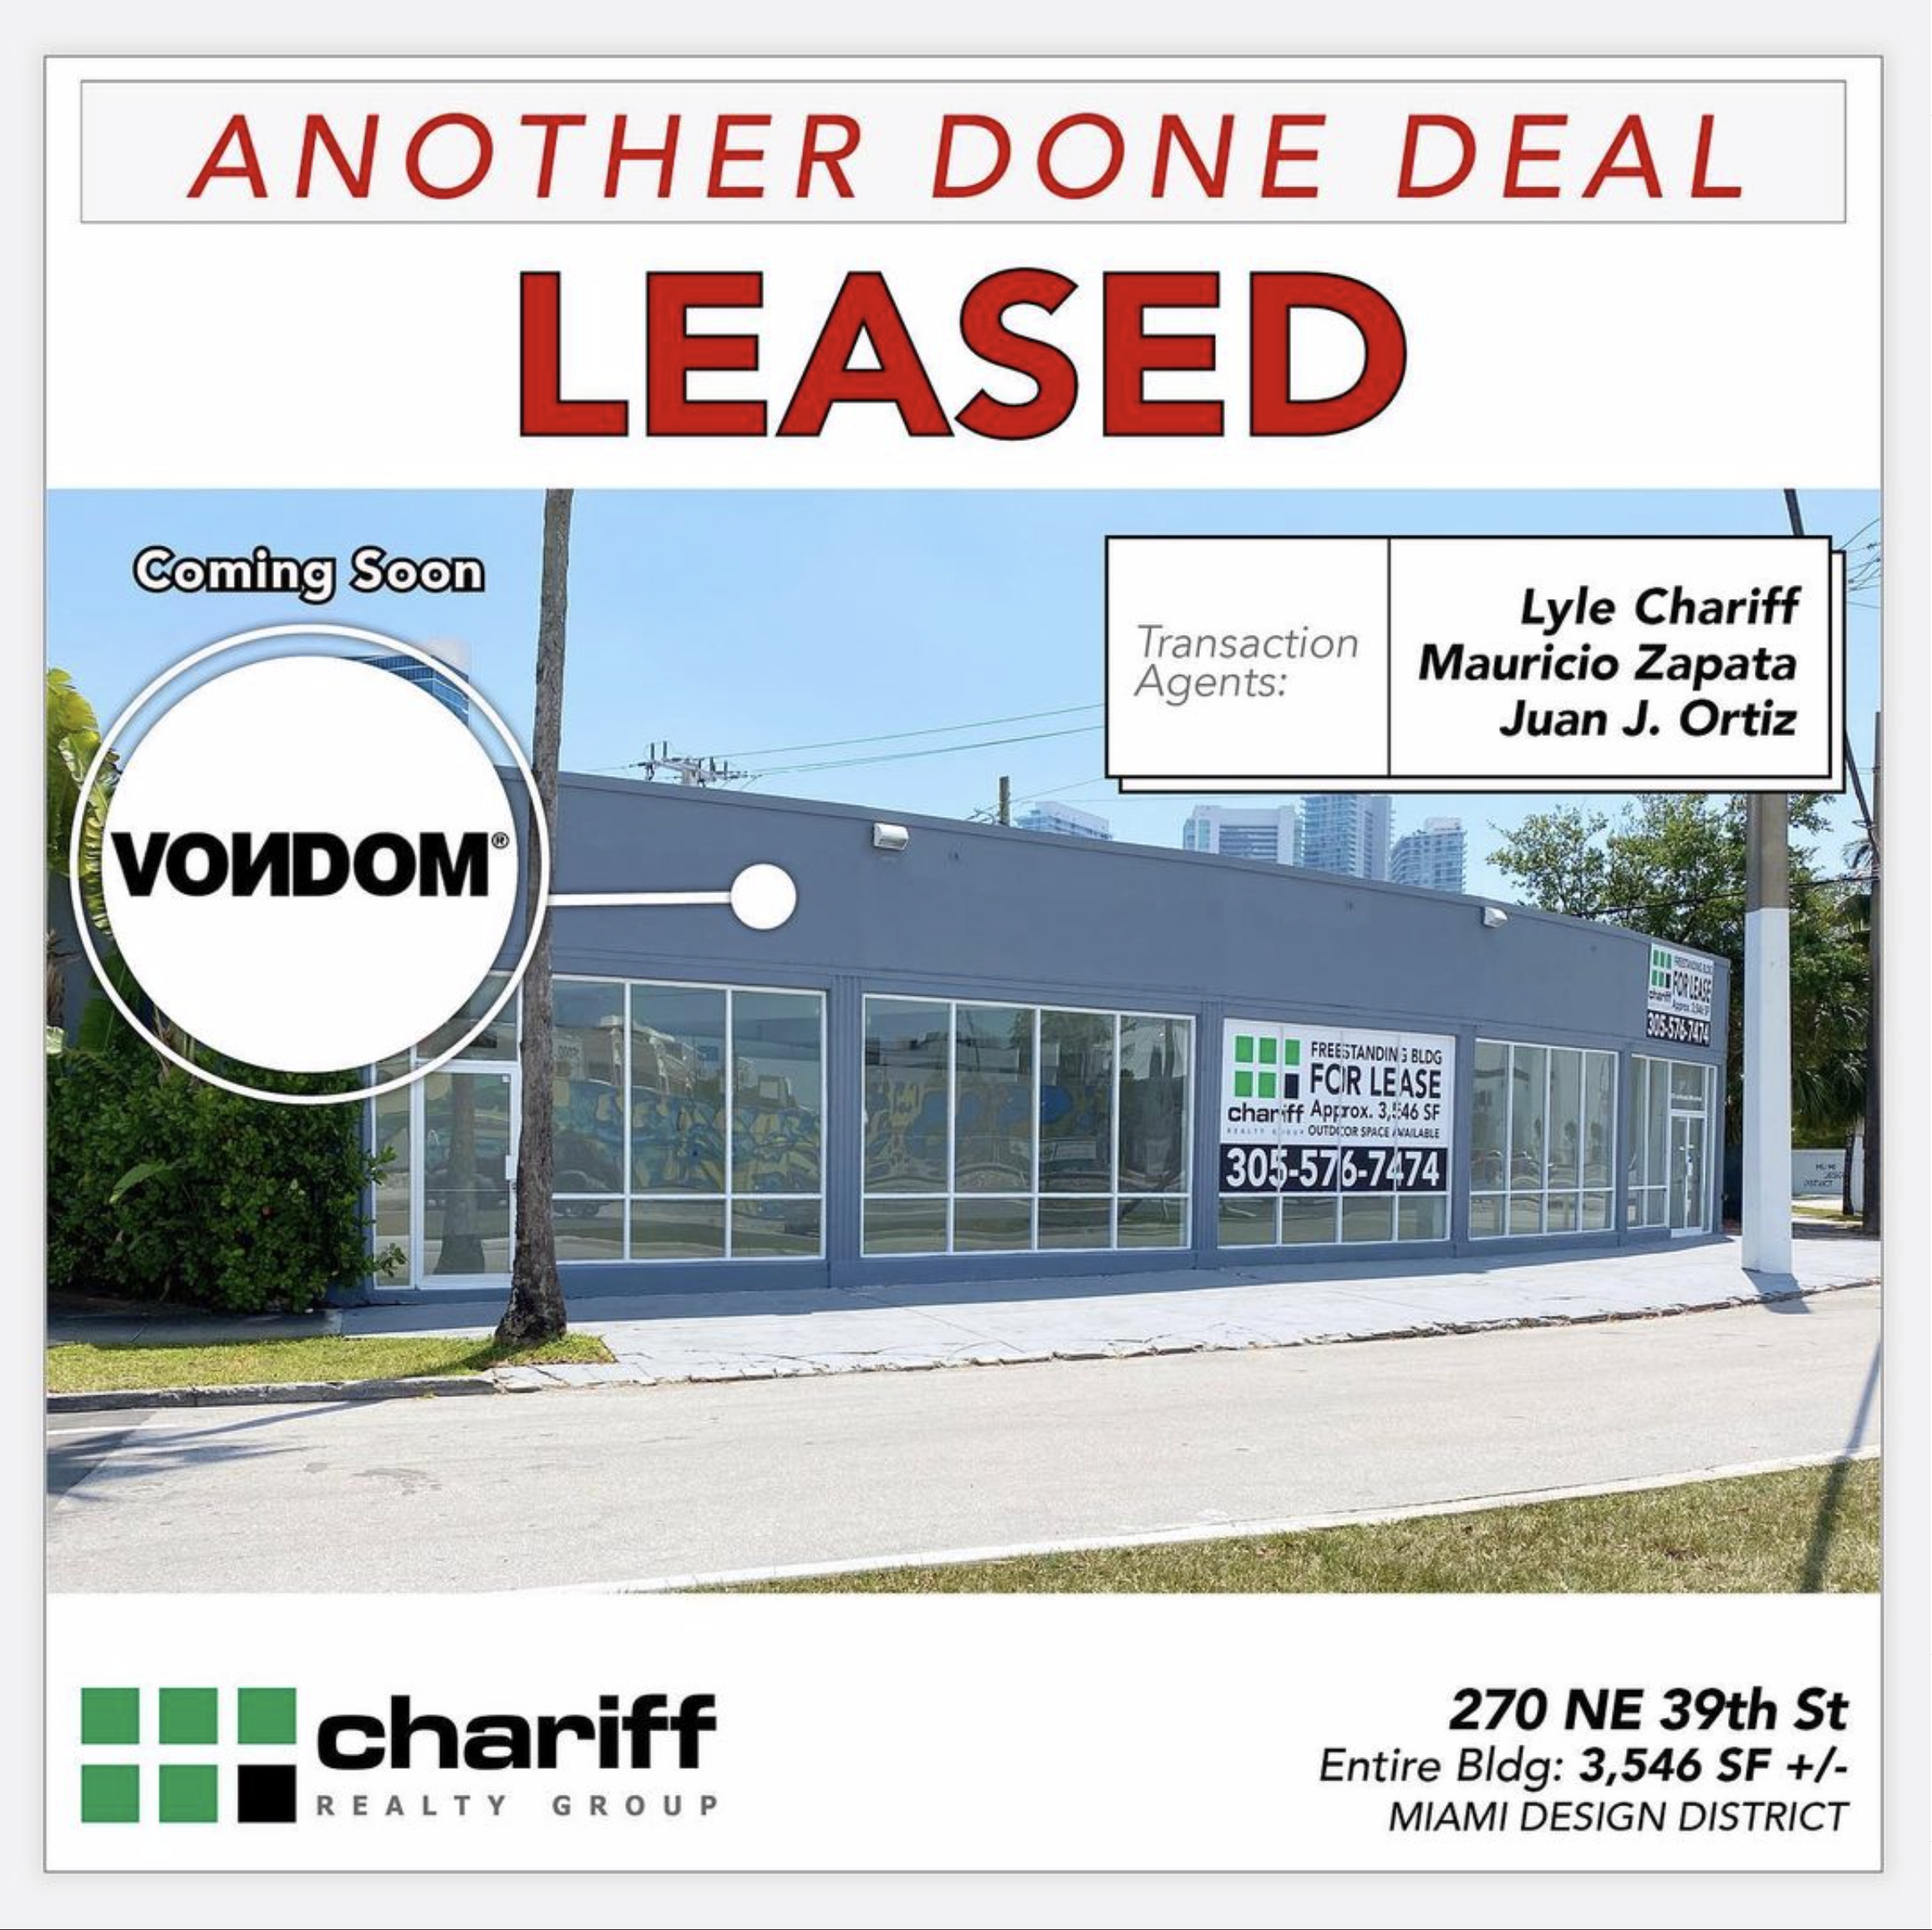 270 NE 39th St - Another Done Deal - Leased -Miami Design District Miami-Florida-33137-Chariff Realty Group